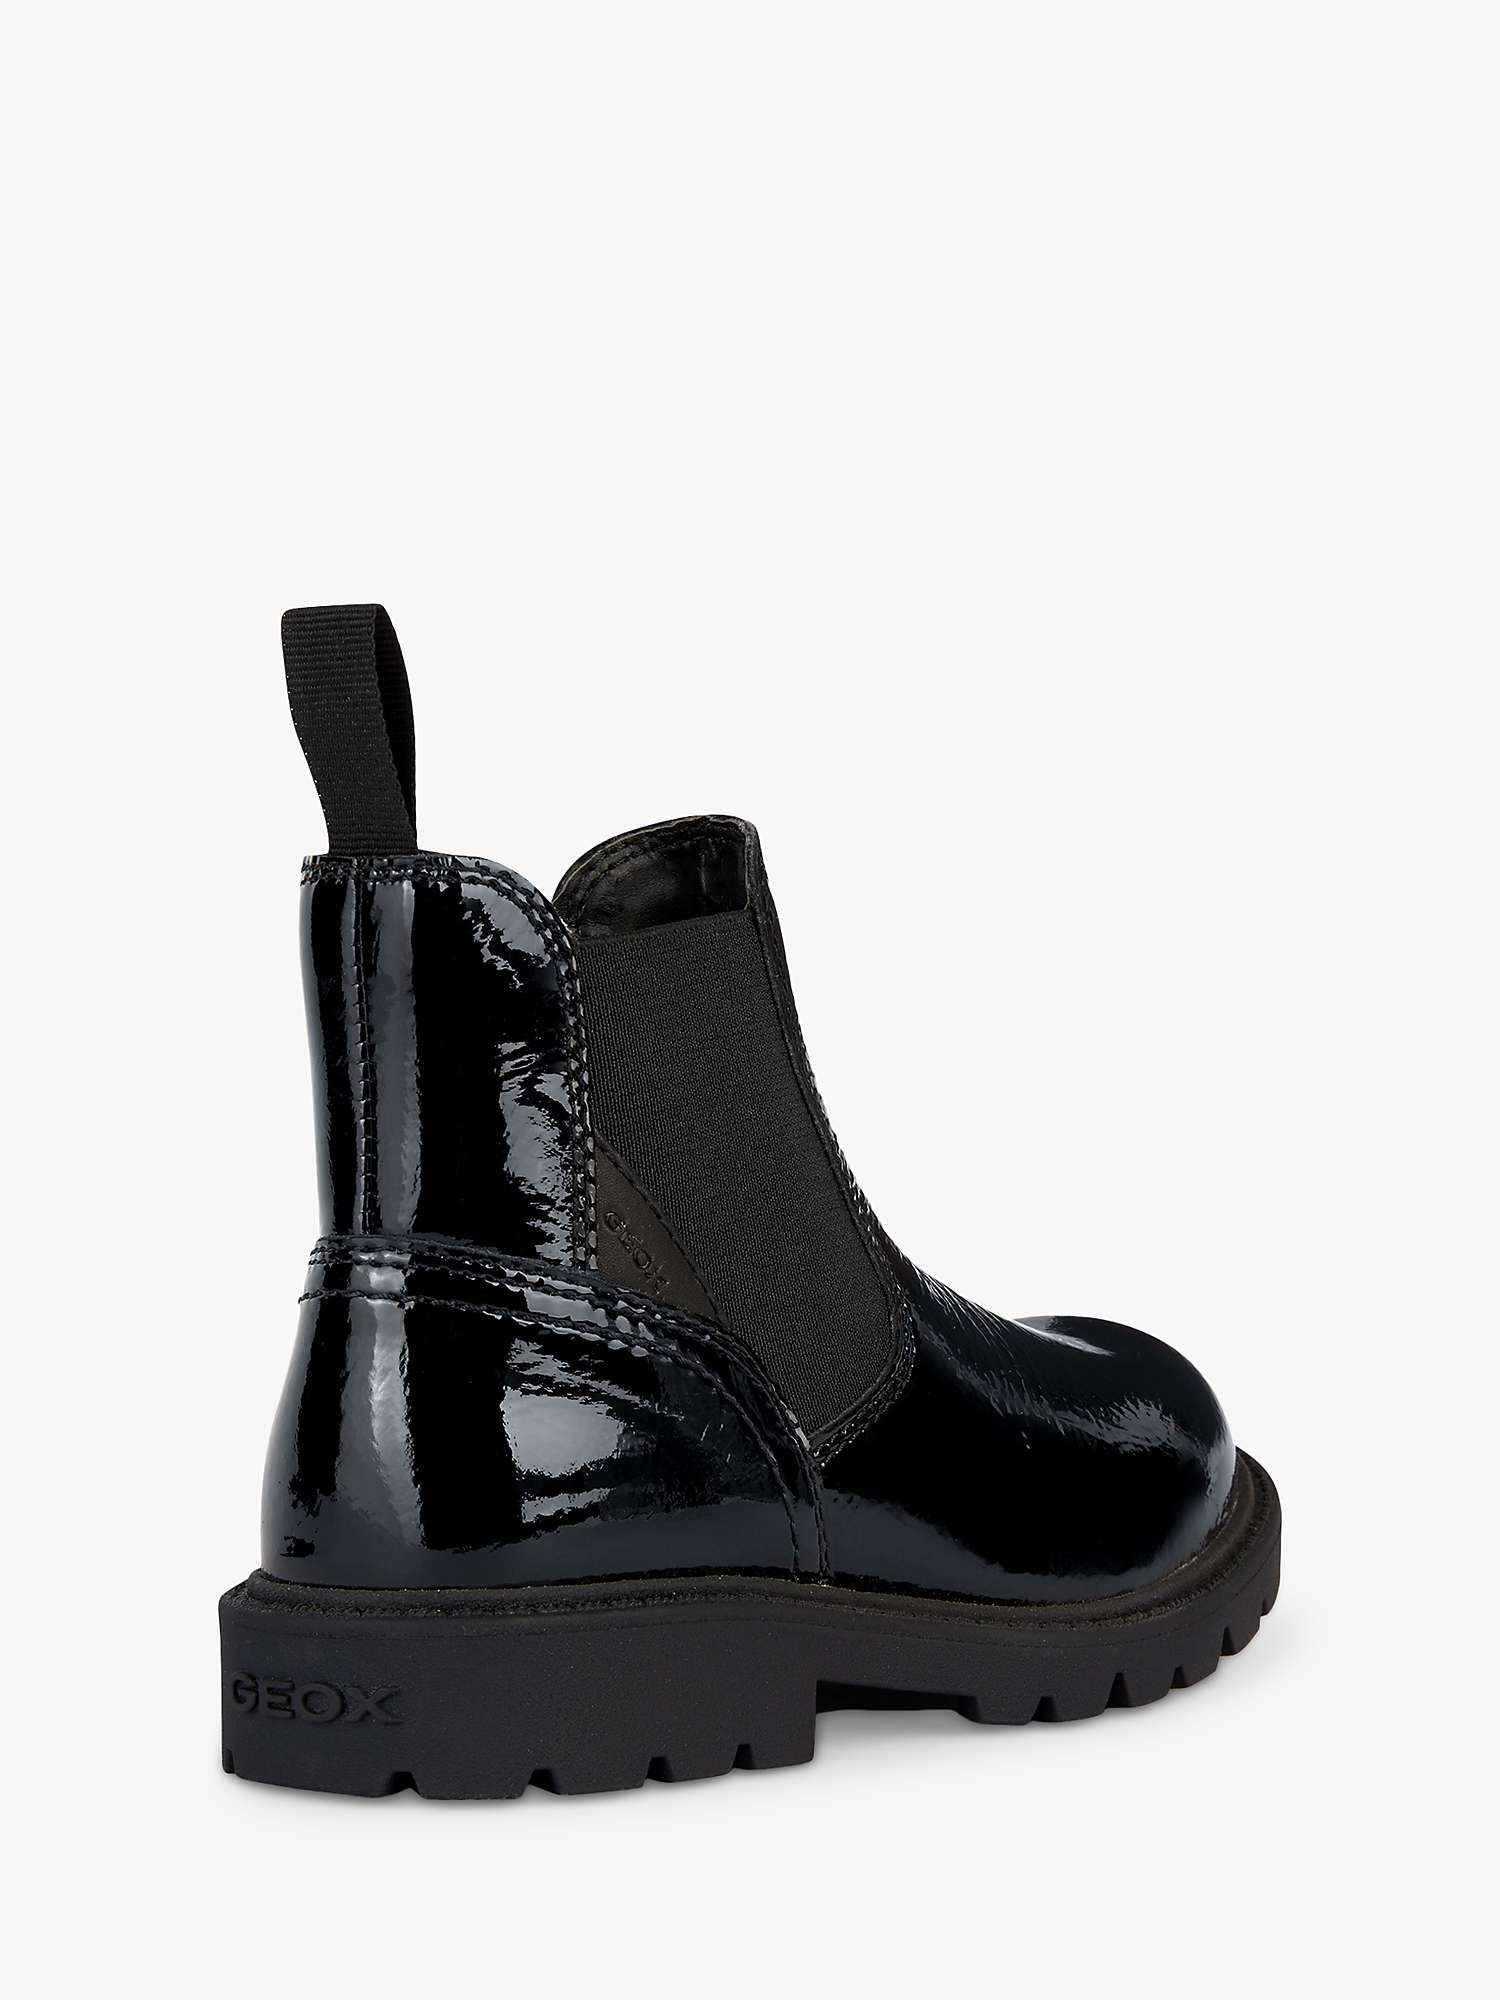 Buy Geox Kids' Shaylax Waterproof Gloss Boots Online at johnlewis.com